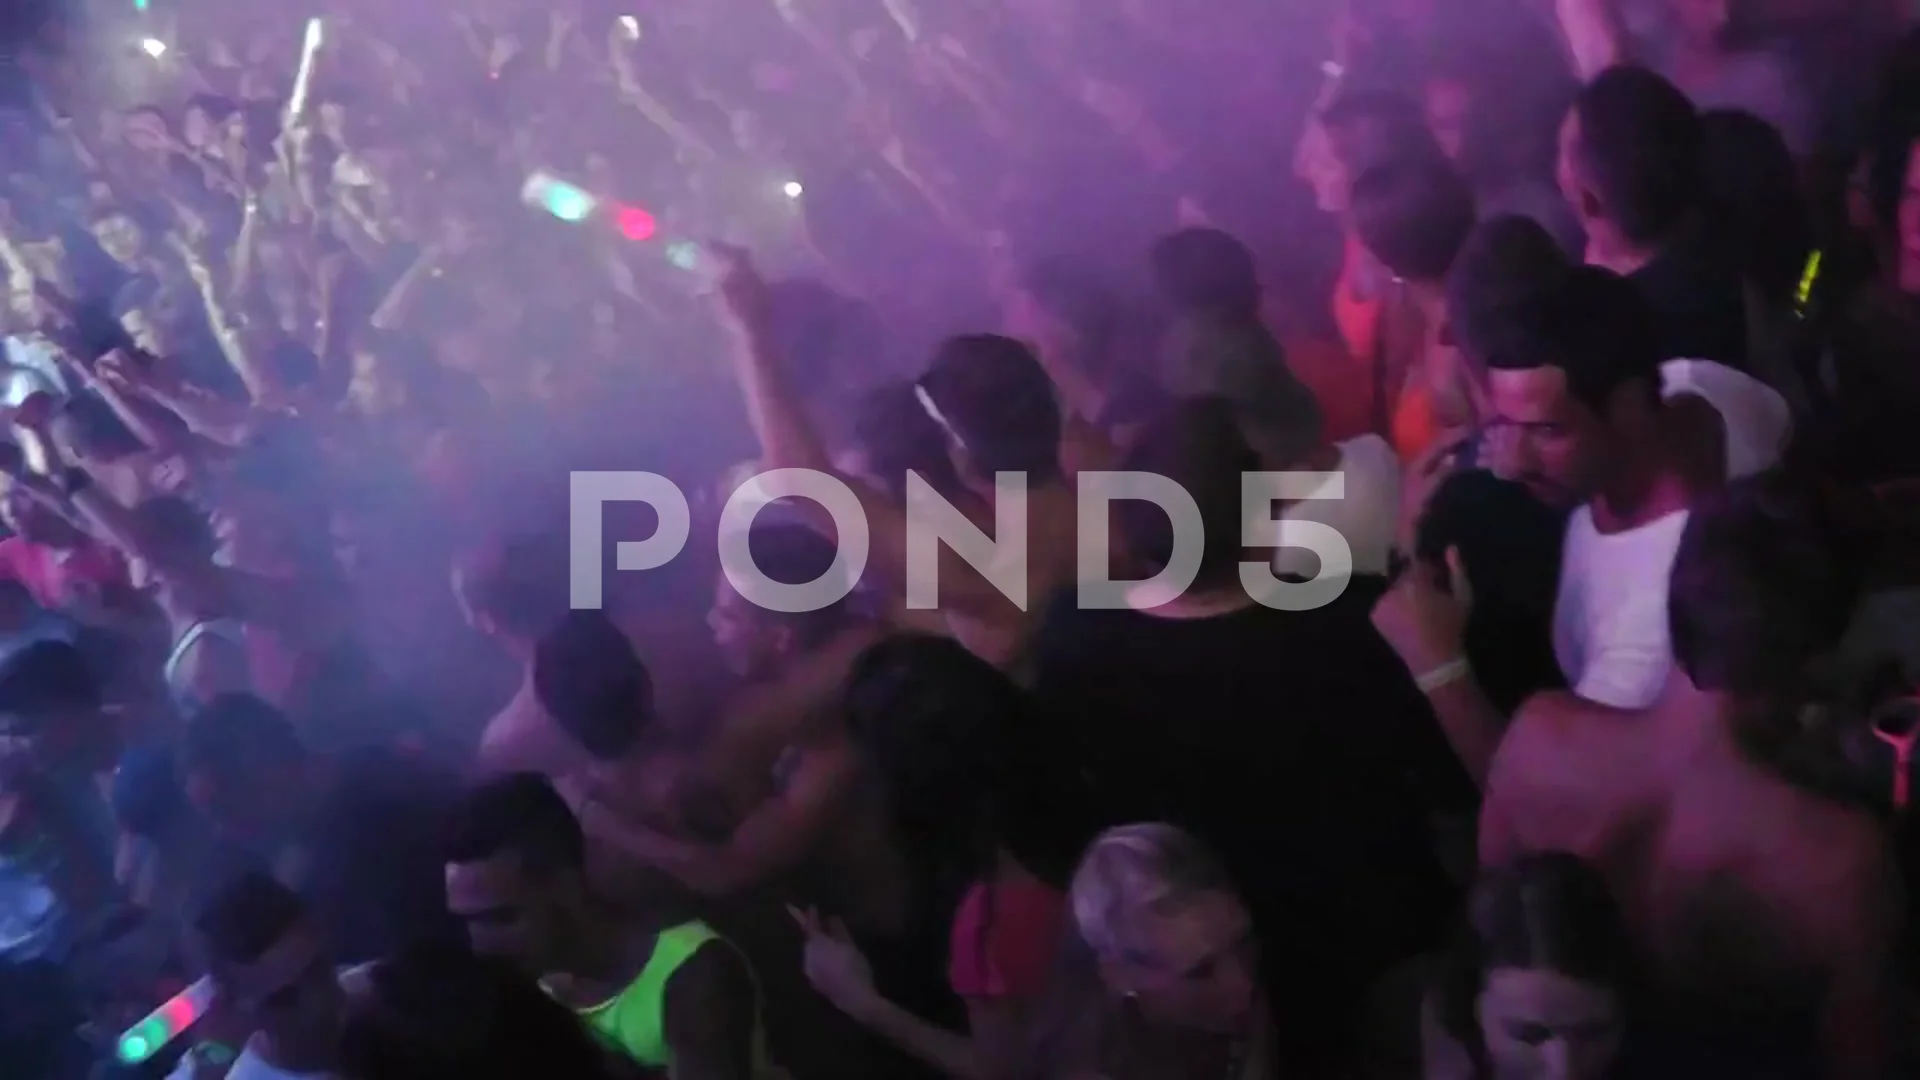 Crowd Edm Concert Stock Footage ~ Royalty Free Stock Videos | Pond5